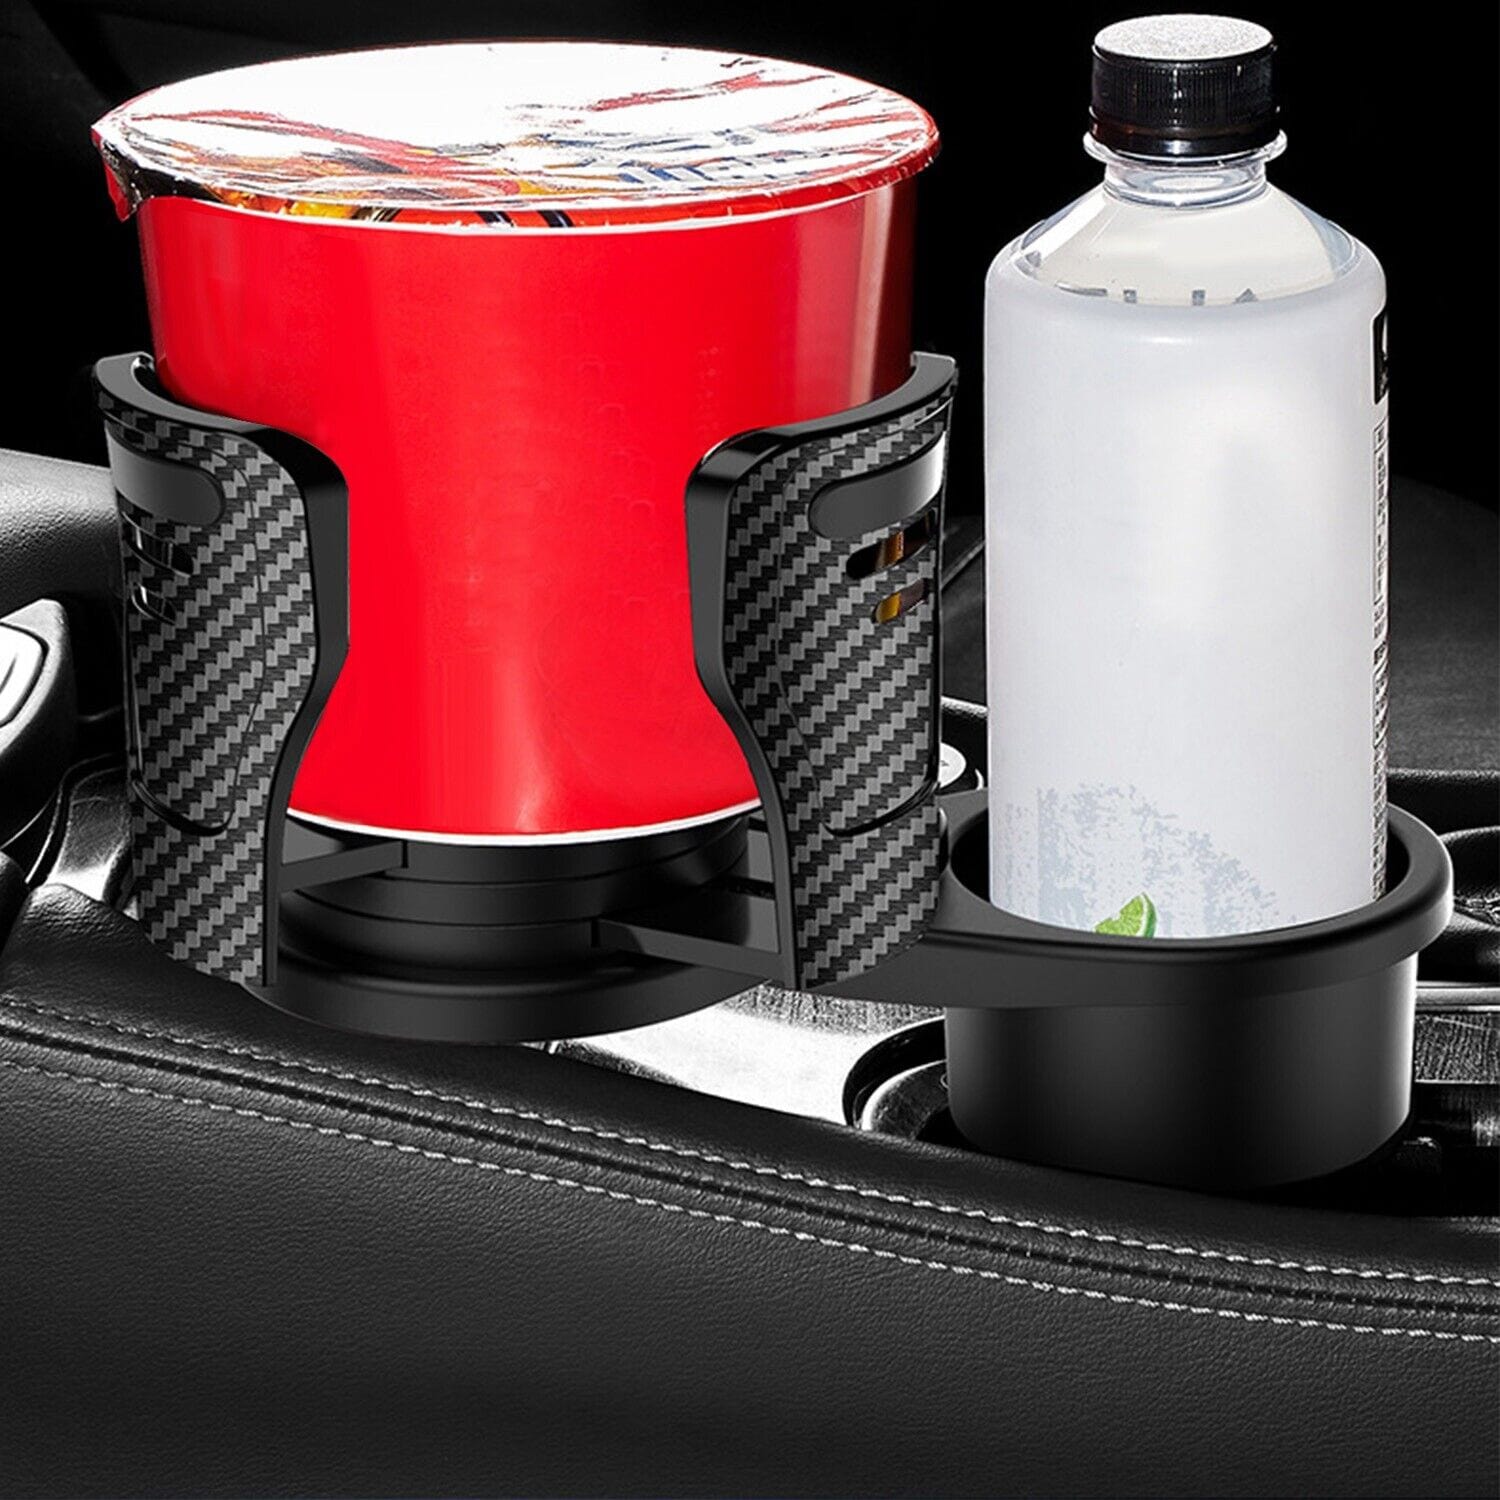 2-in-1 Car Cup Holder │ 50% OFF │ Shop Now – THE GOODS MANIA